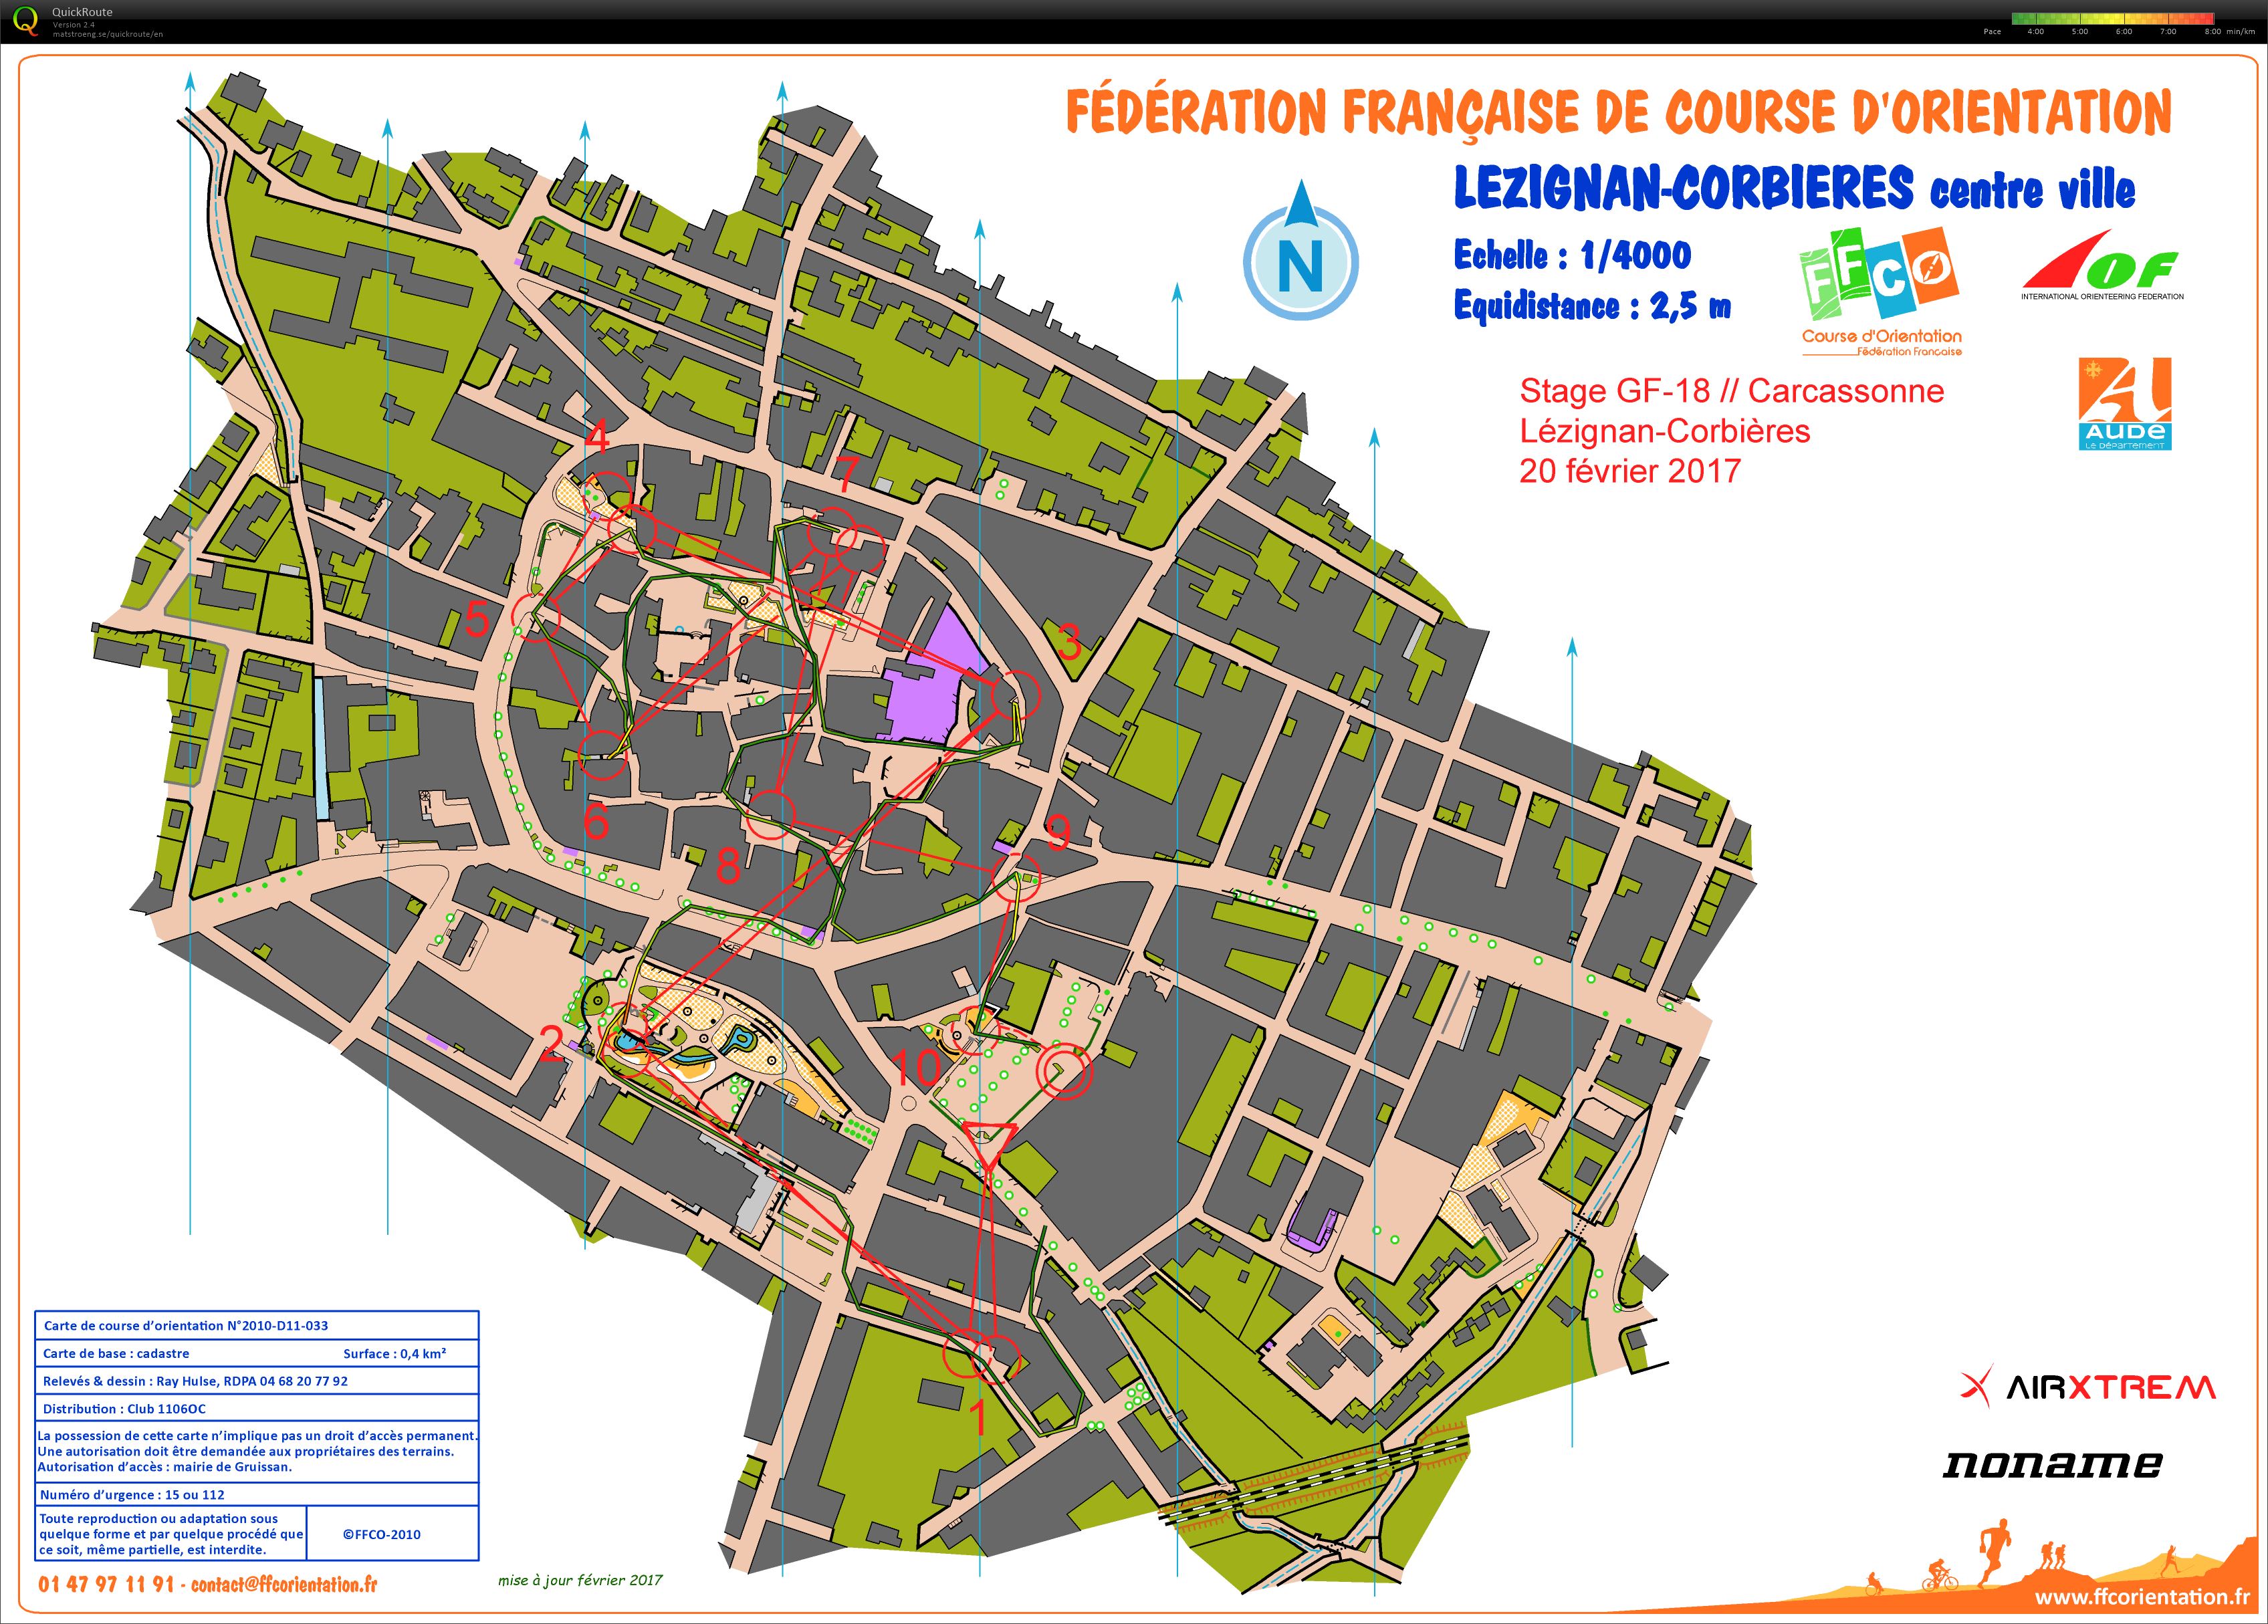 Manche 1 (chasse) relais sprint stage gf-18 Carcassonne (20/02/2017)